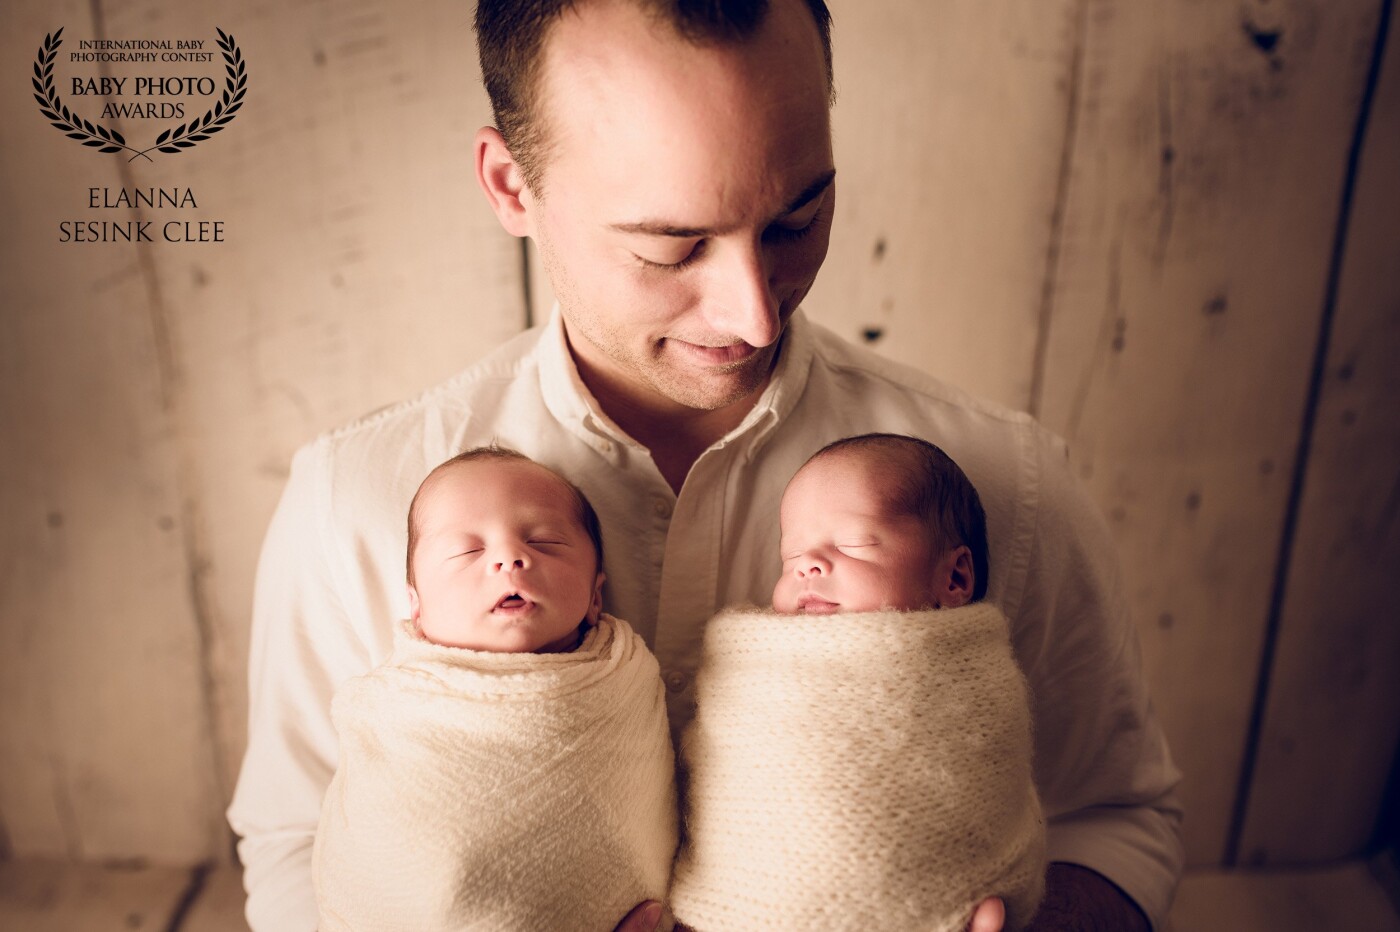 I didn't know what to expect when I invited a set of twins into my newborn studio.  This was the very first set of twins I had ever photographed and it quickly became my favorite gallery to share with my clients.  Just seeing the joy on this first-time dad's face was priceless for me.